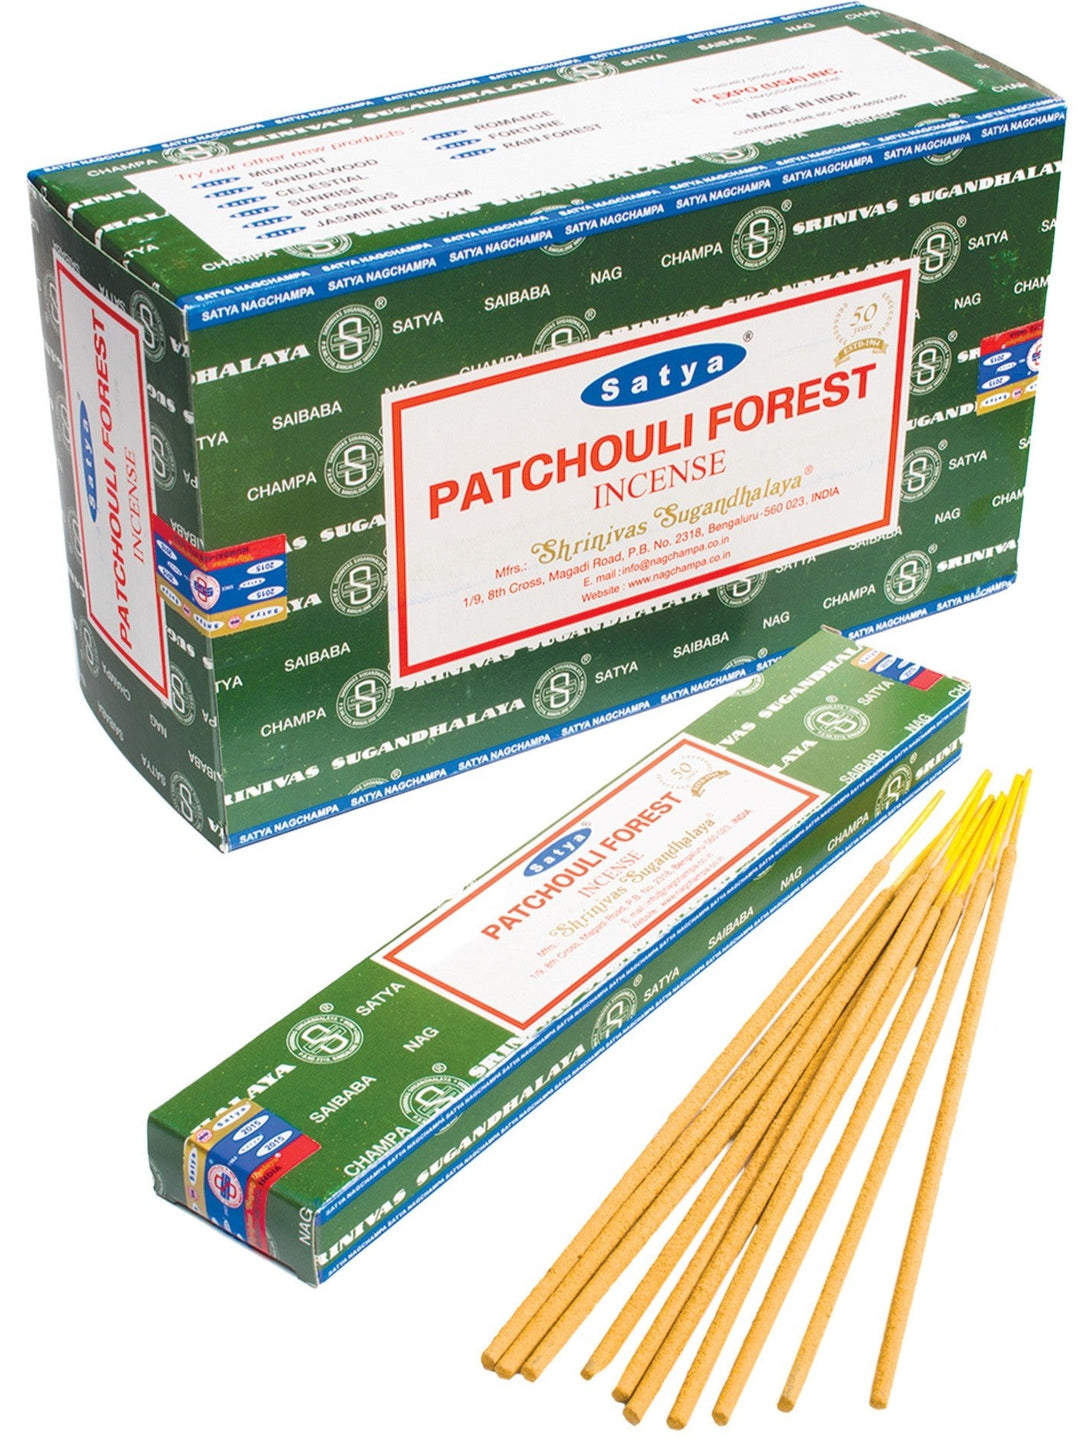 Patchouli Forest Box of 12 Incense Sticks Second Nature Online